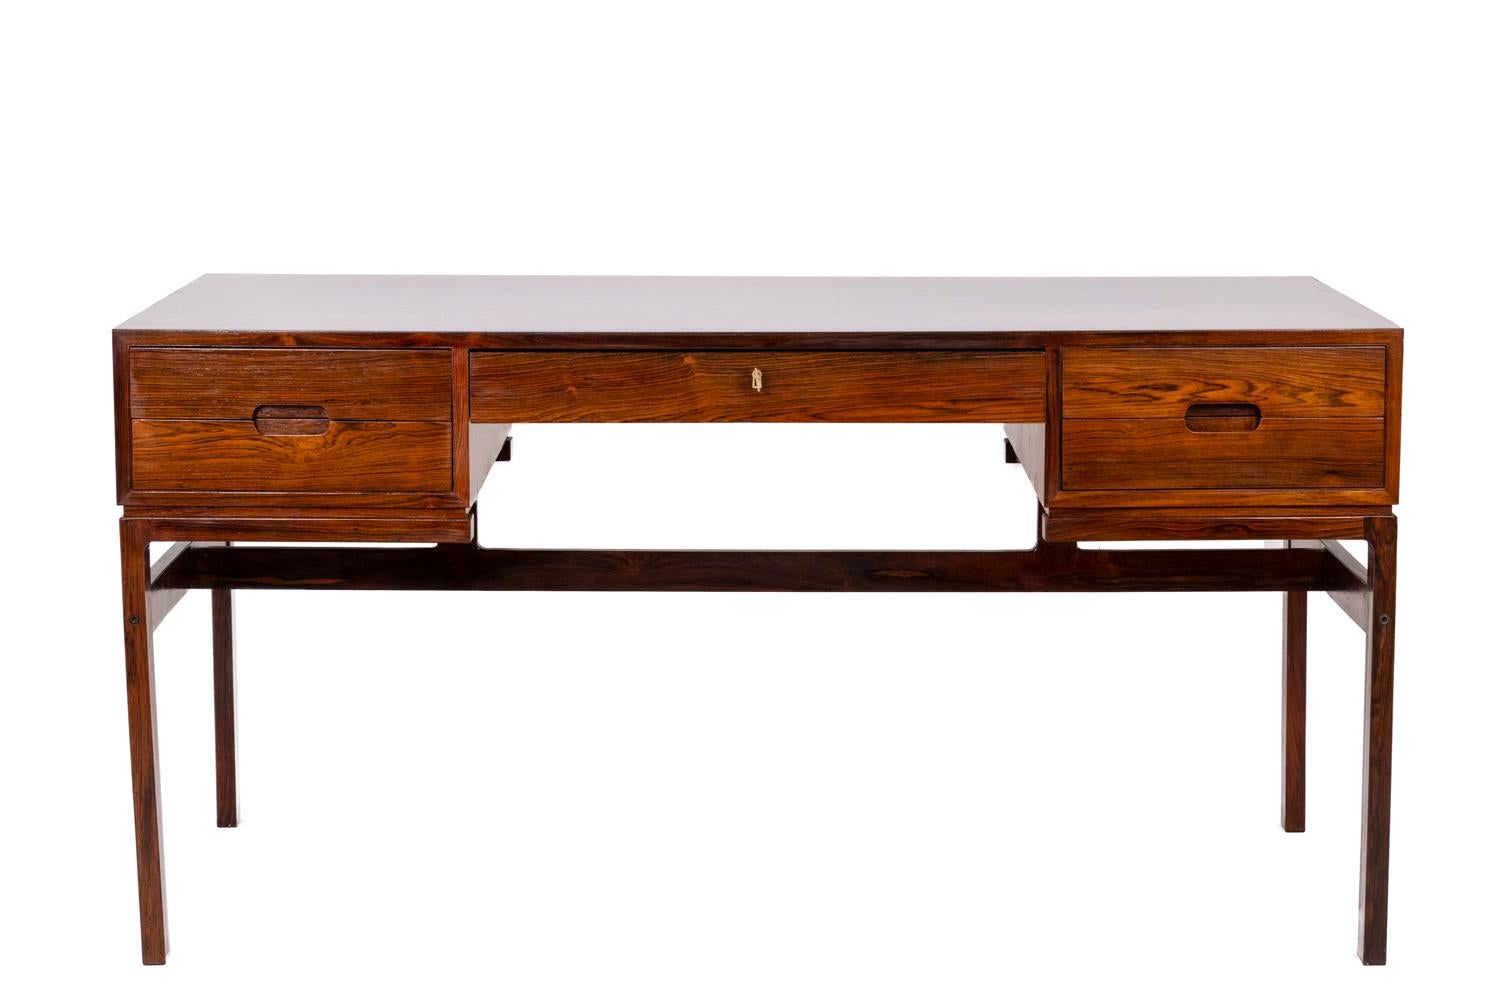 Arne Wahl Iversen, attributed to.
Danish control, edited by.

Desk in rosewood, opening with five drawers in front, two niches in the back. H-shaped legs connected by a central spacer. Assembly of drawers in straight tails. Rectangular handles.